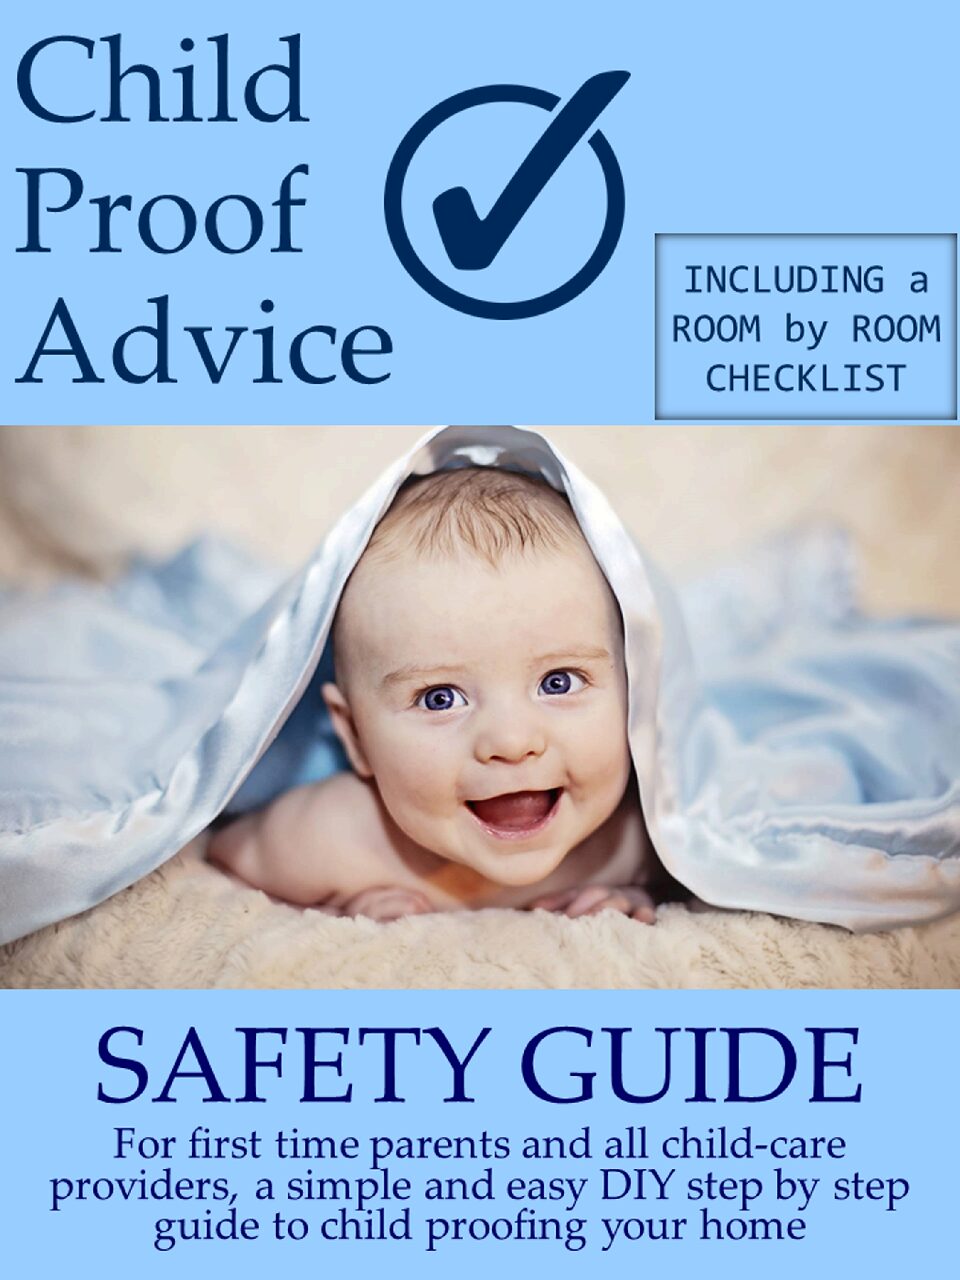 Parent's Guide to Child Safety